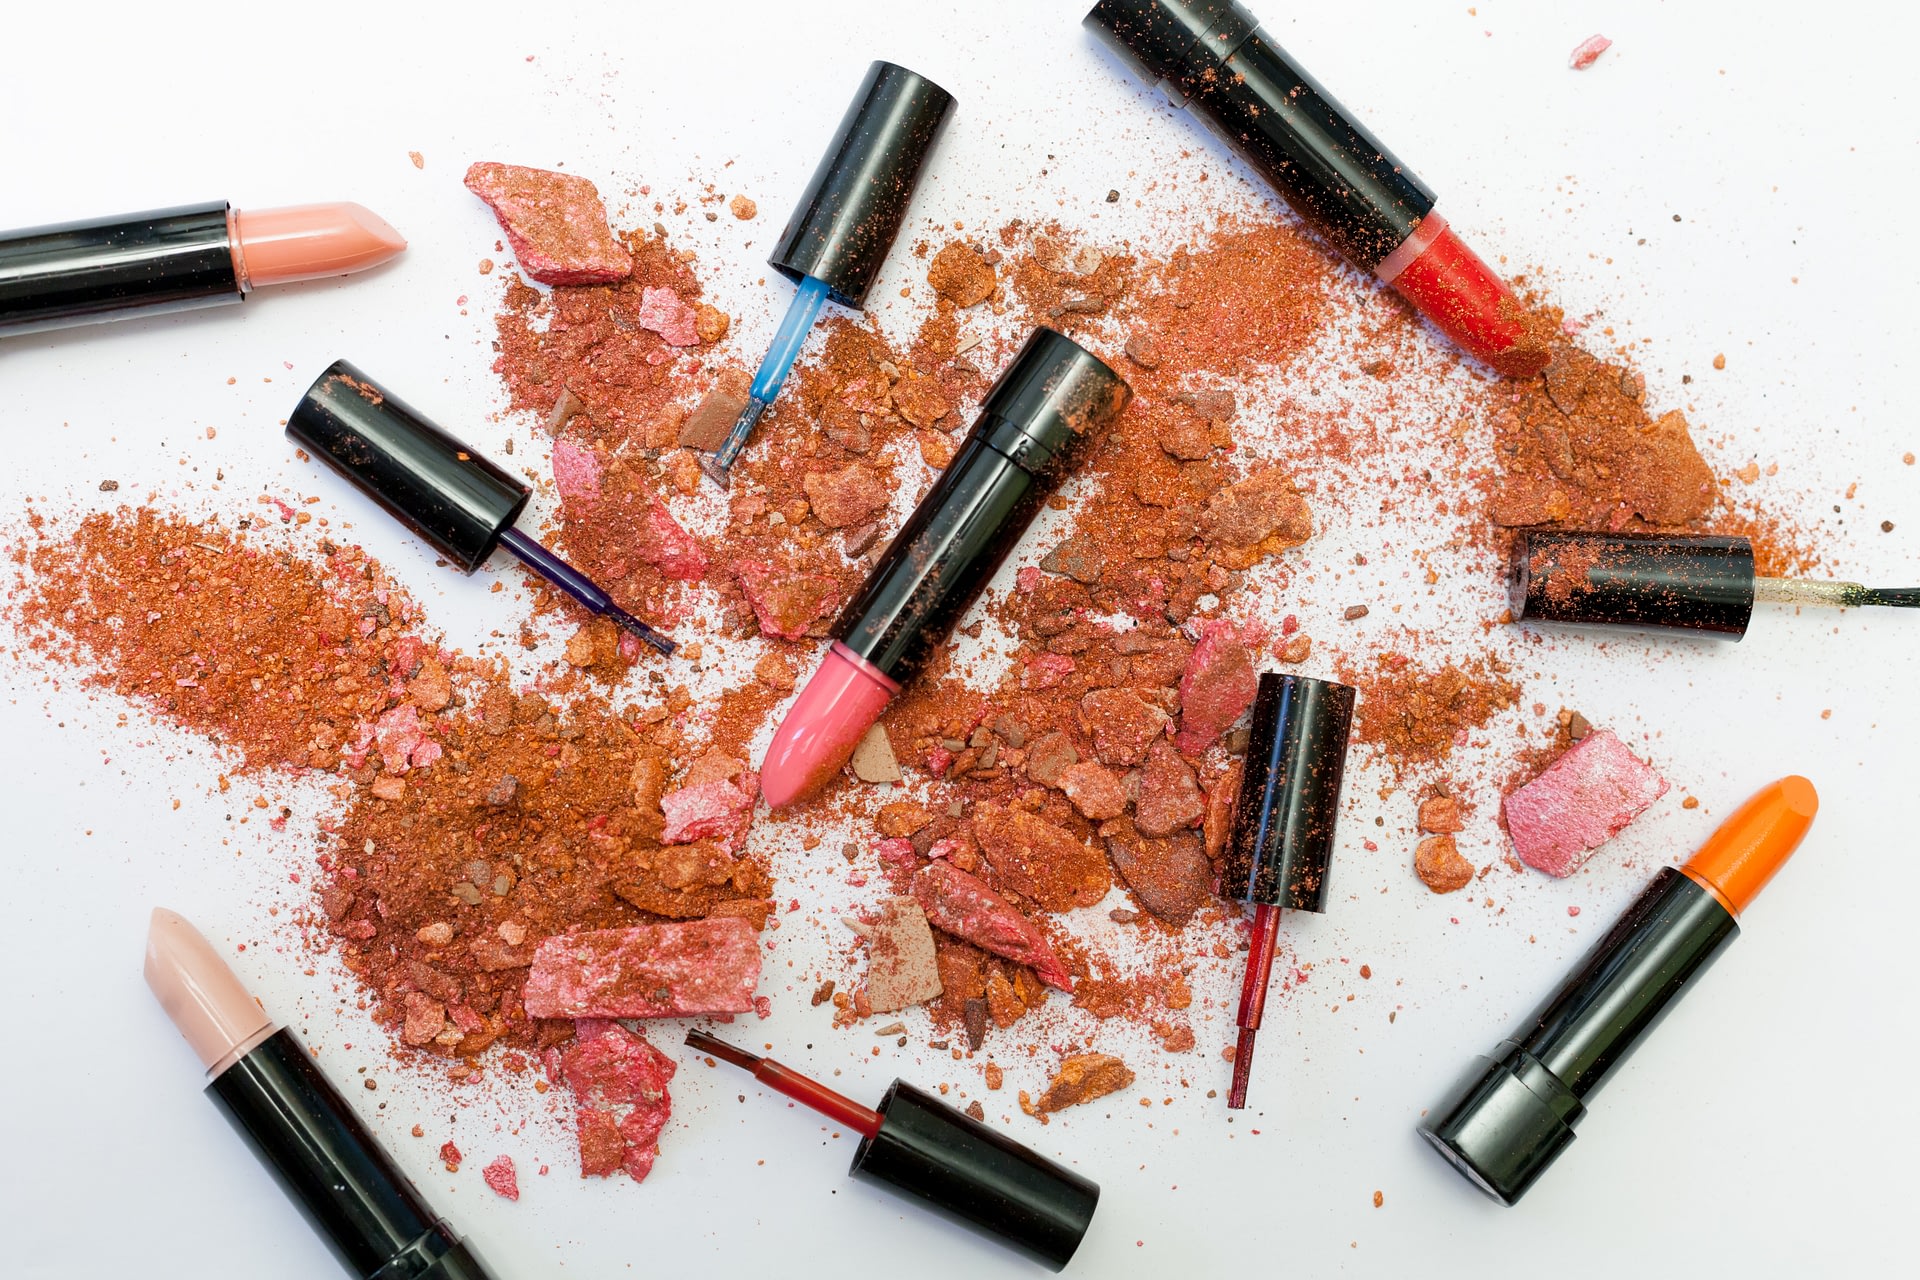 Lipstick and nail polish scattered around broken makeup